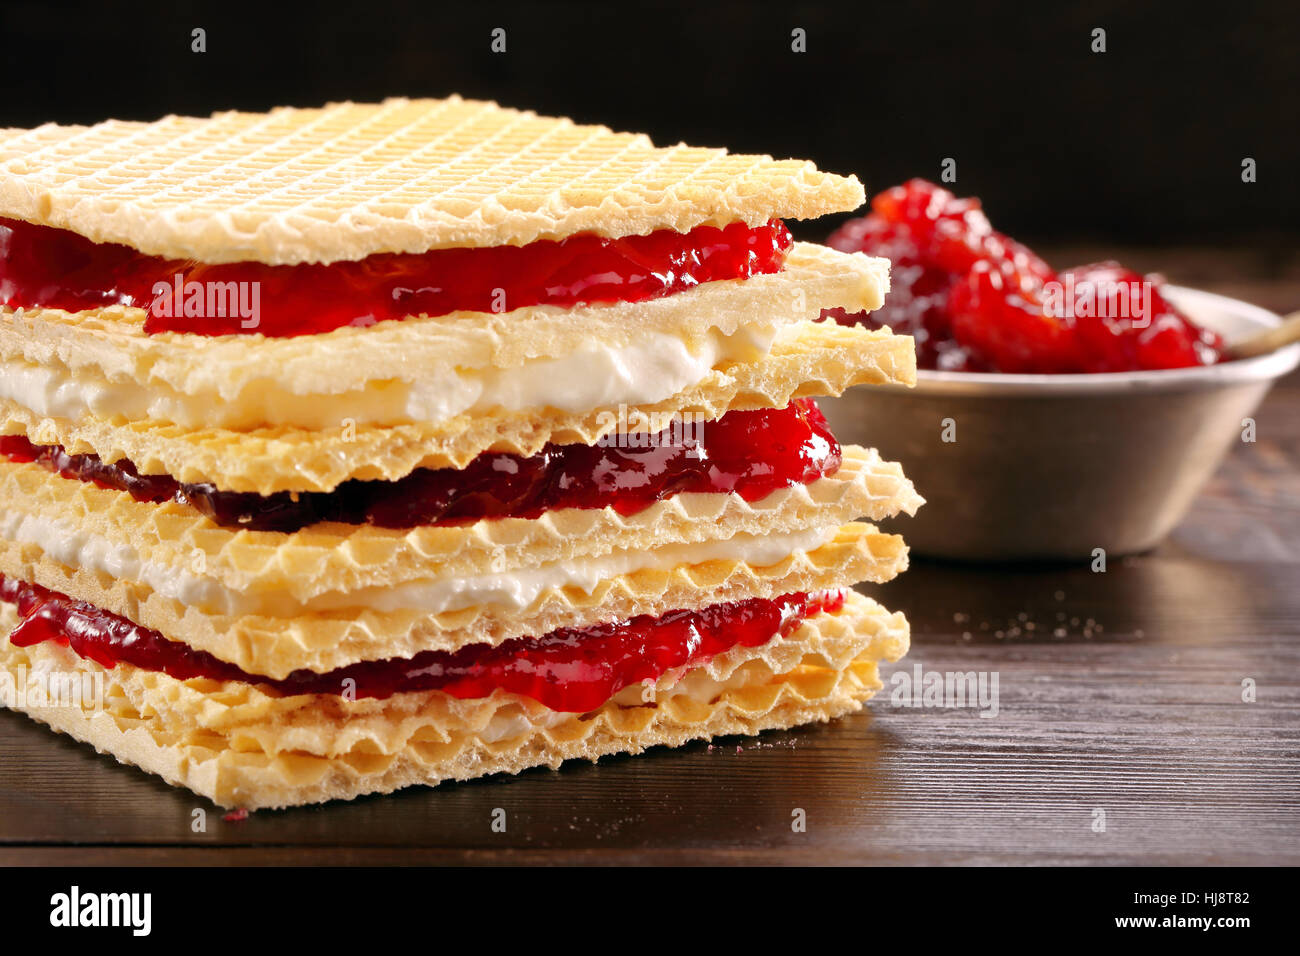 Yellow Waffle With Cottage Cheese And Jam Stock Photo 131731042